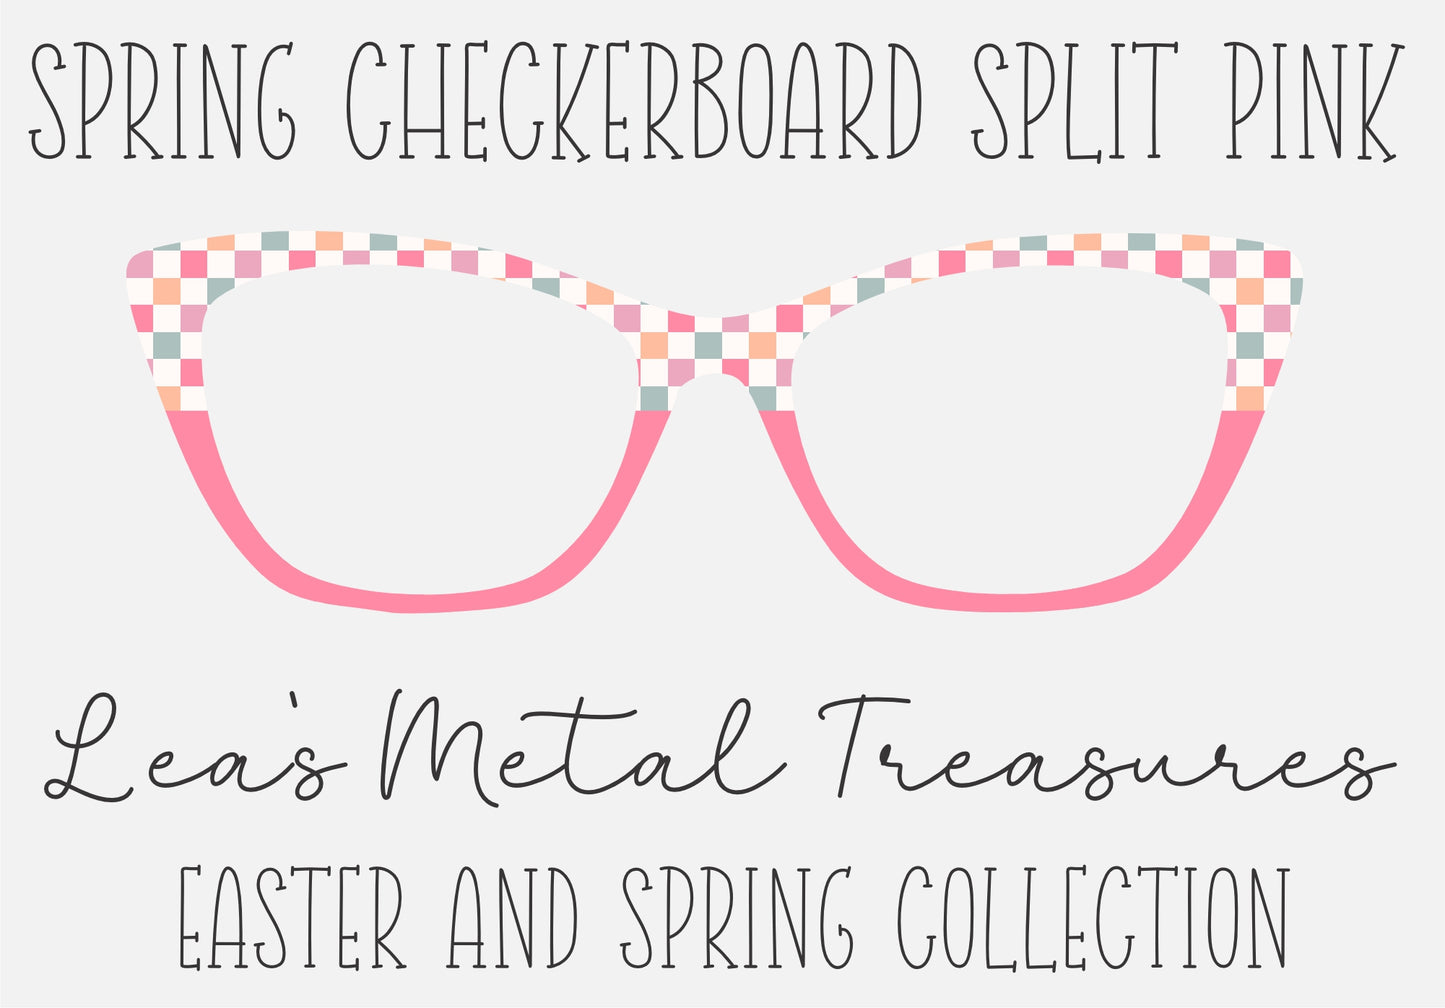 SPRING CHECKERBOARD SPLIT PINK Eyewear Frame Toppers COMES WITH MAGNETS